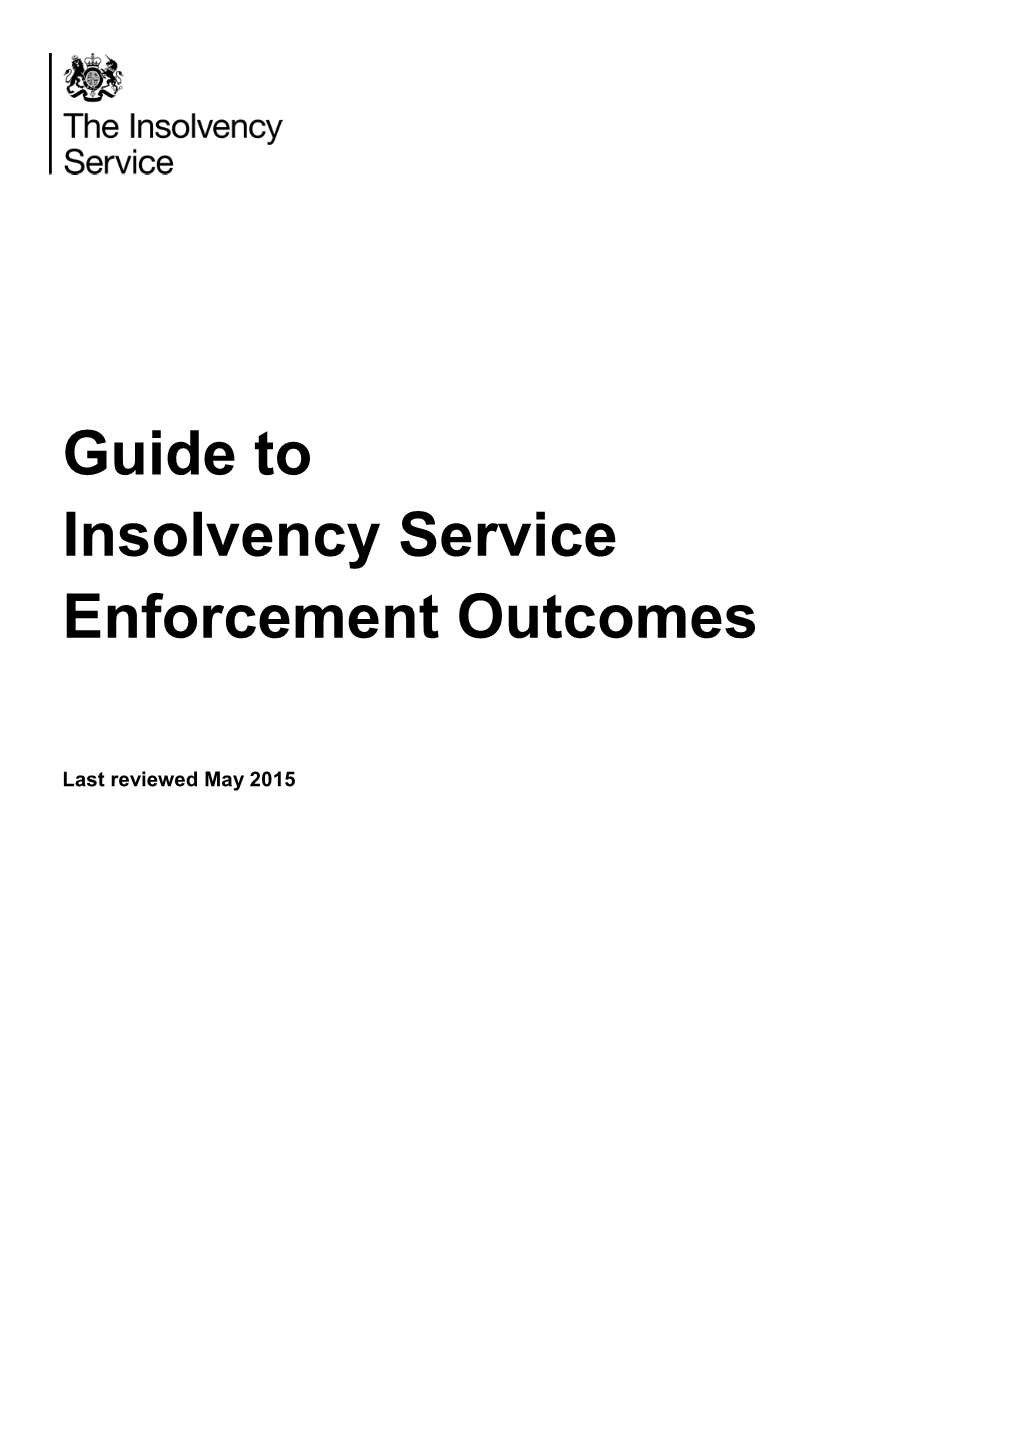 Guide to Insolvency Service Enforcement Outcomes